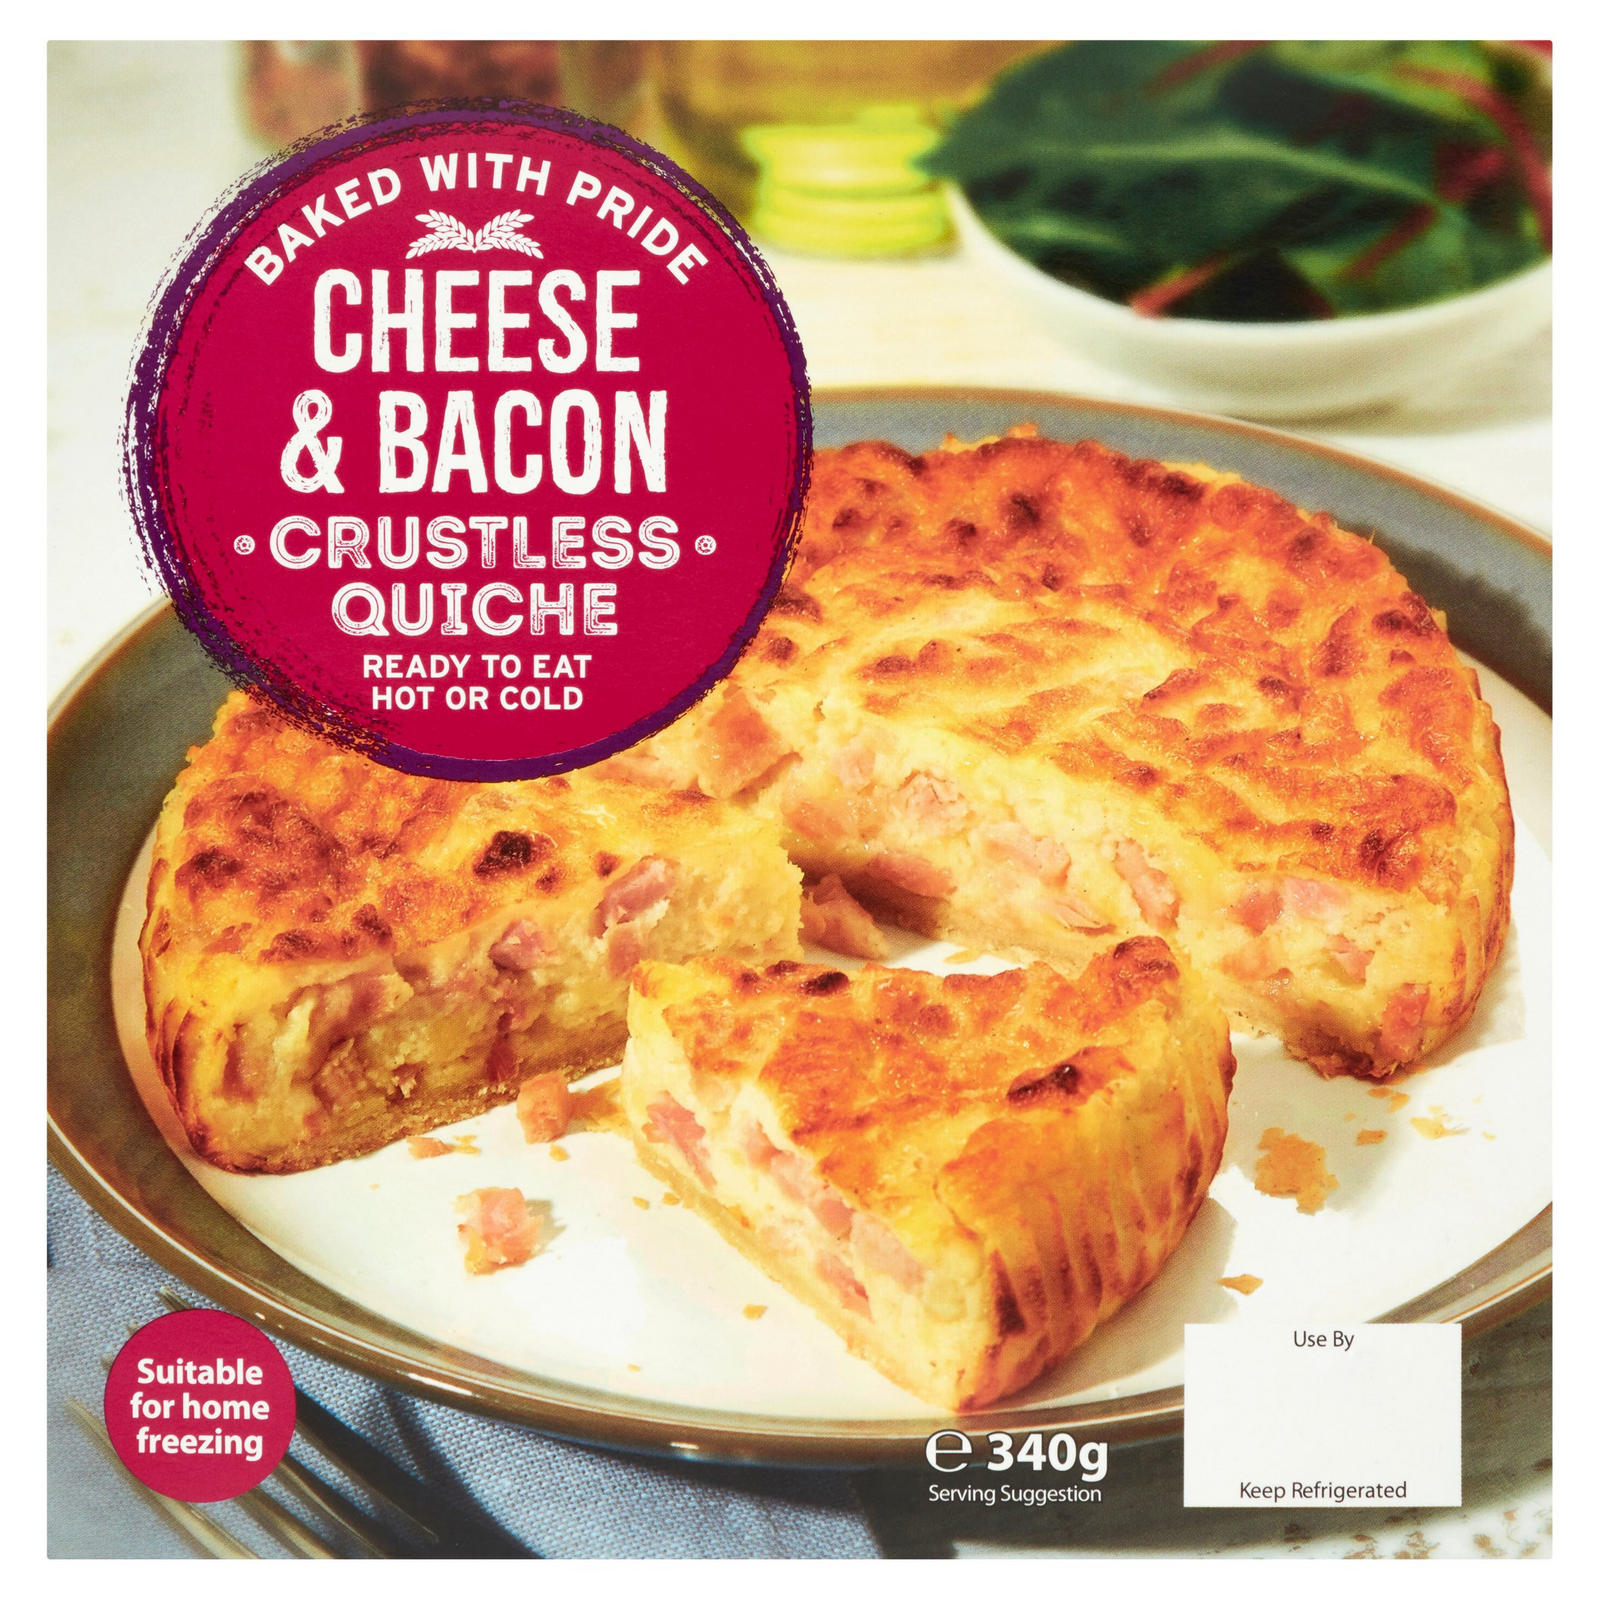 Cheese & Bacon Crustless Quiche 340g | Pies & Quiches | Iceland Foods